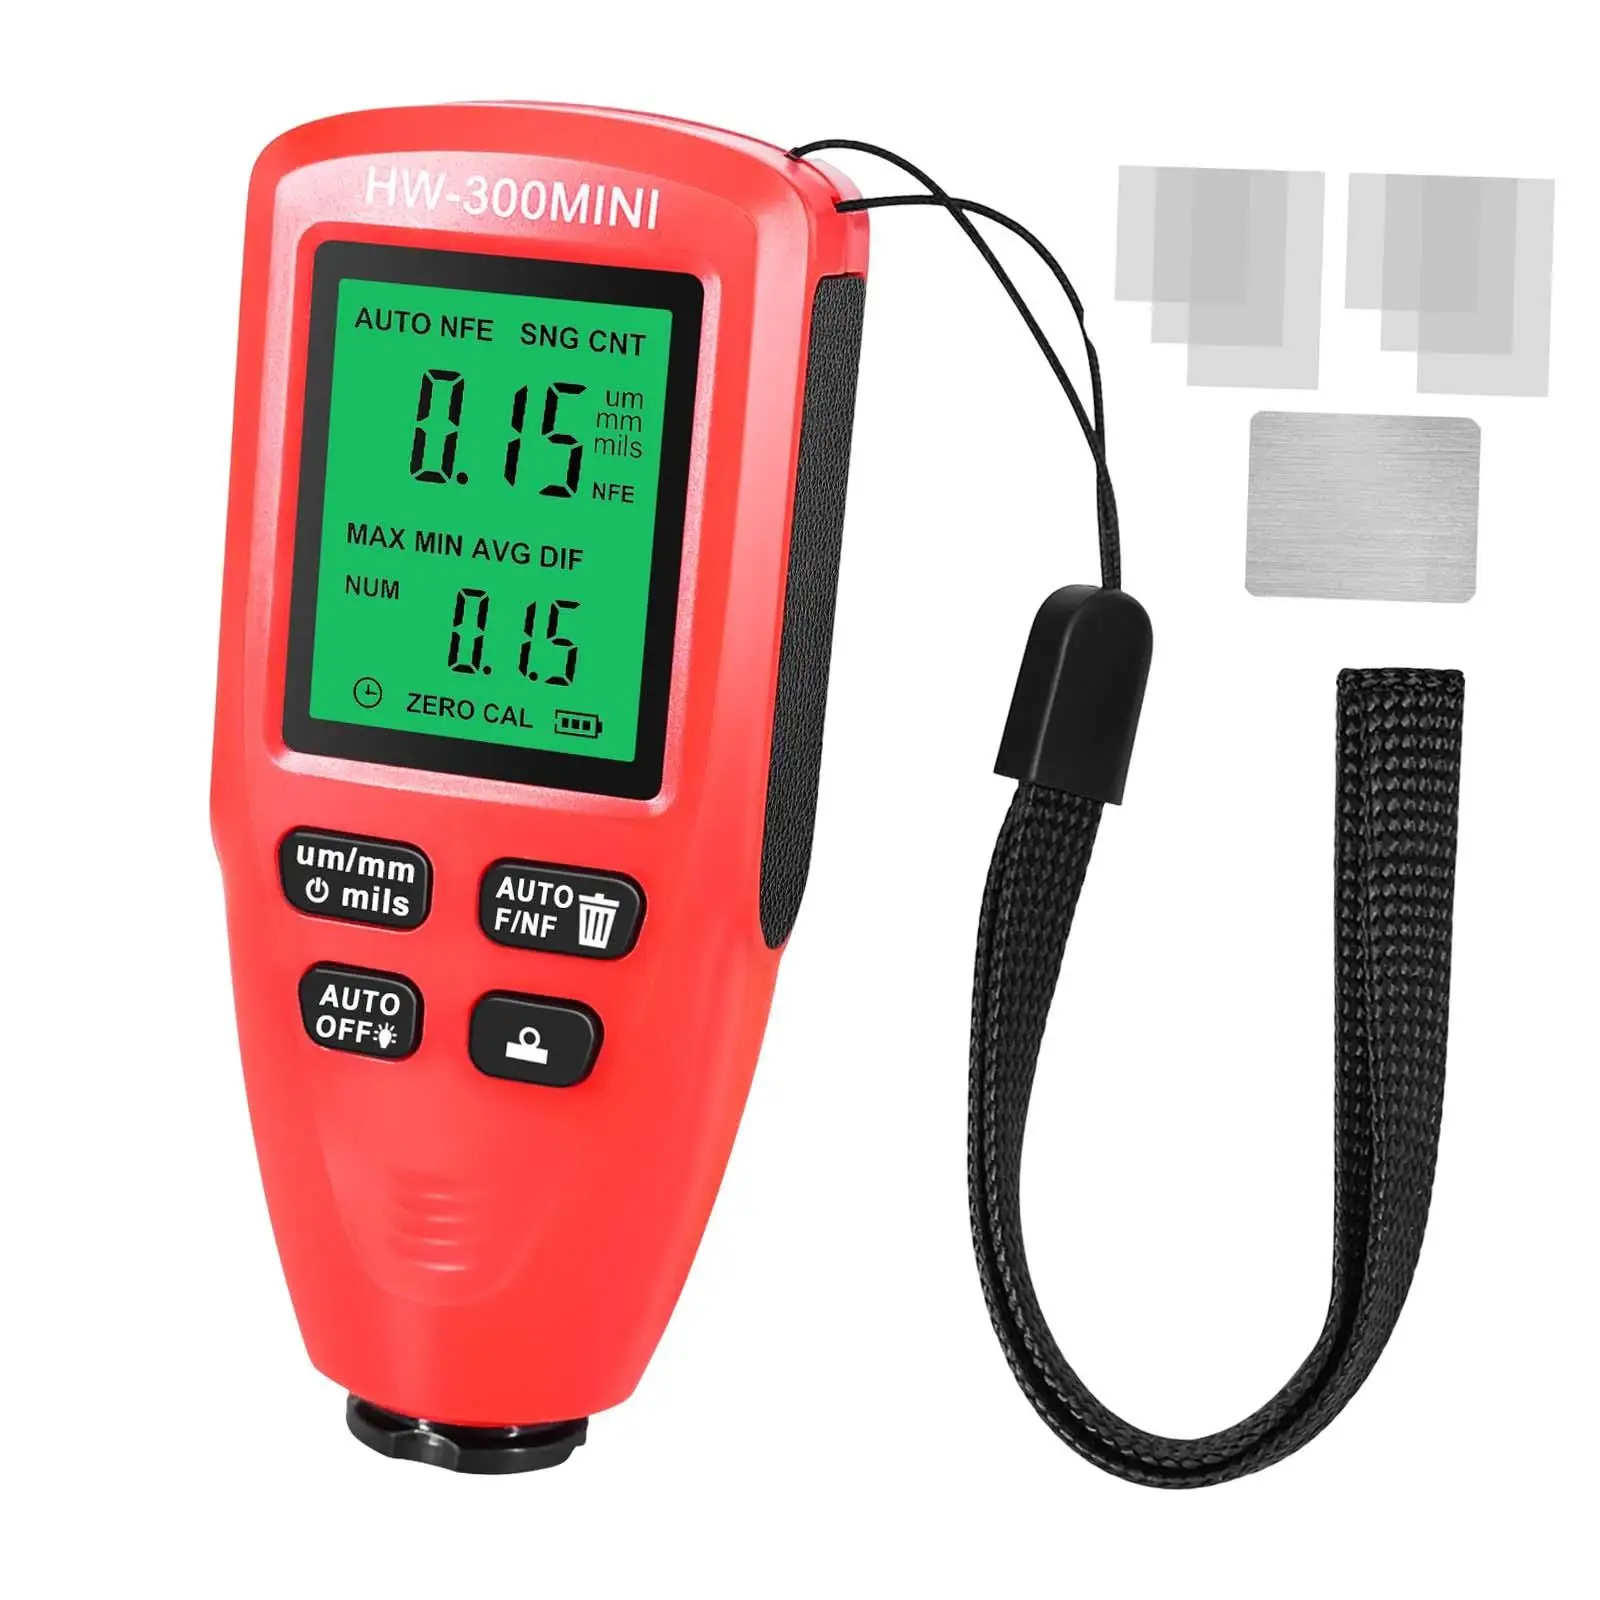 Thickness Gauge, Paint for Iron and Aluminium Bodies, Paint Thickness Gauge, Paint Gauge with self Calibration